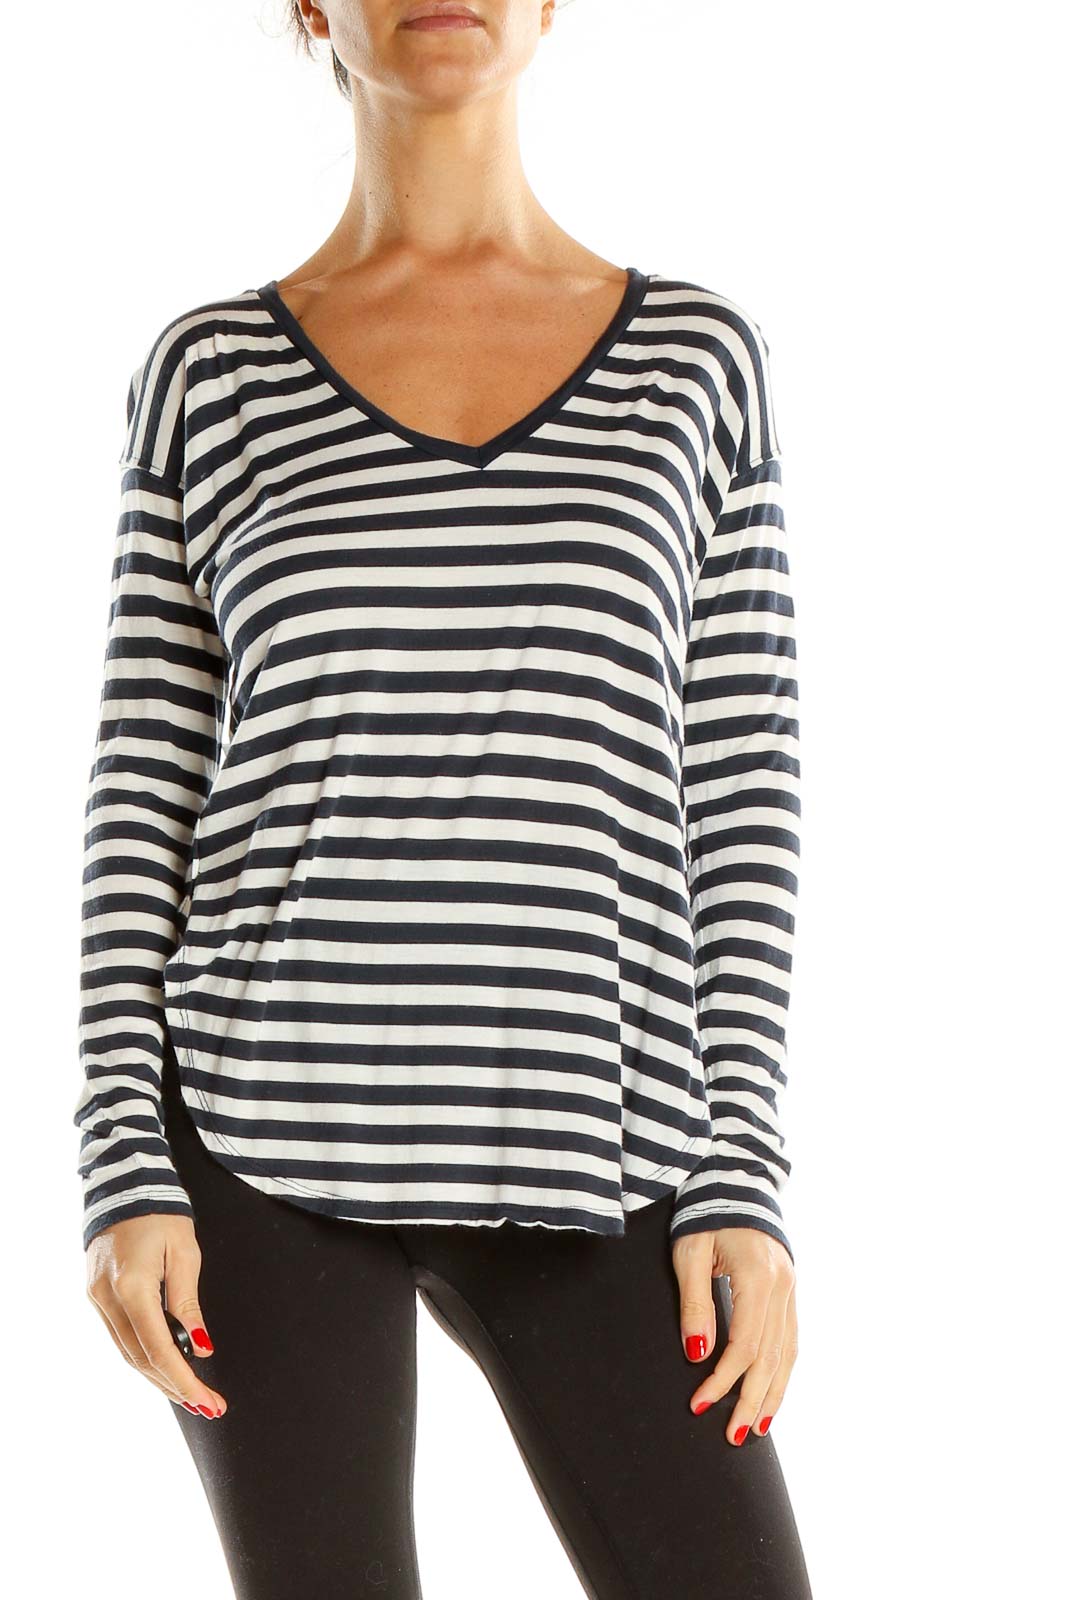 Black and White Striped Casual Top Front